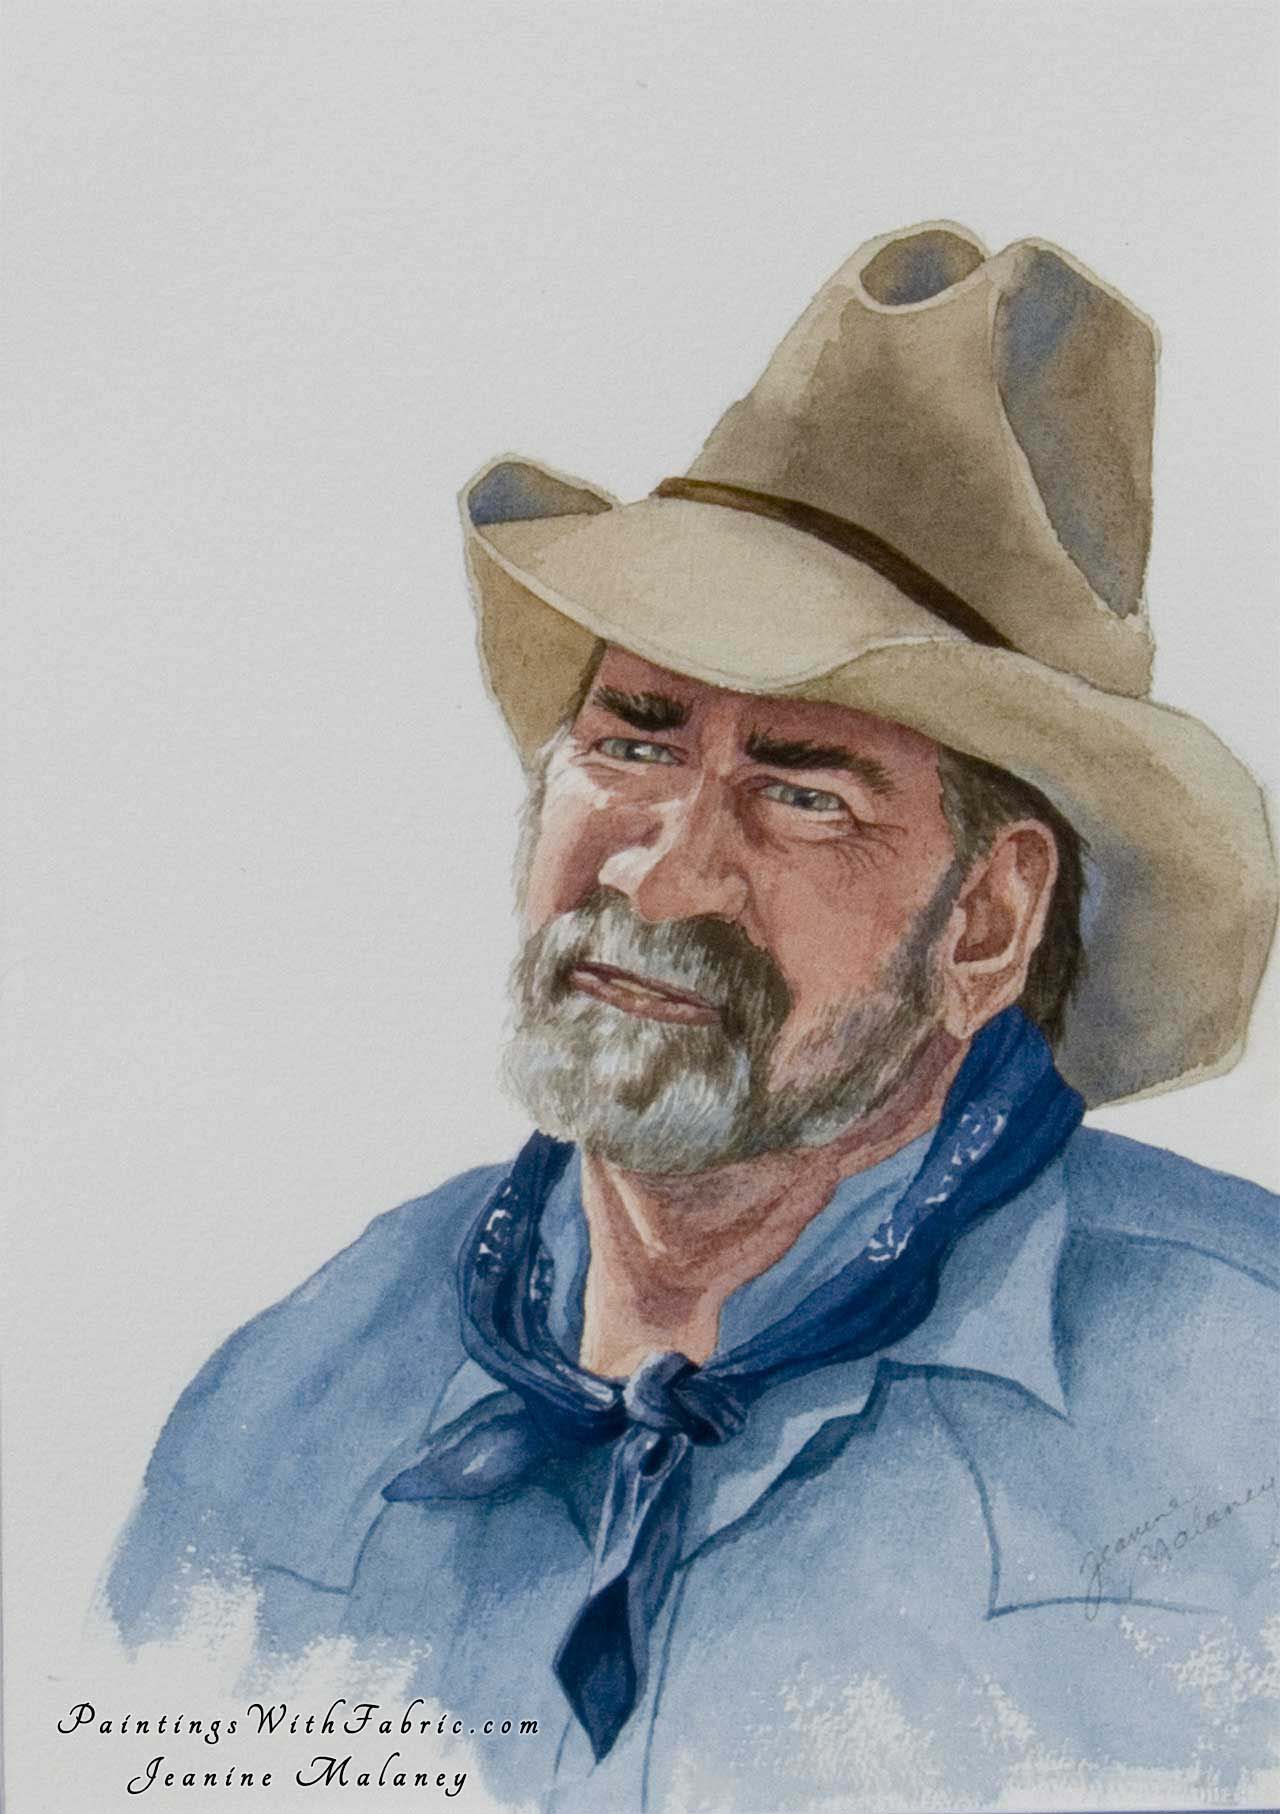 Matt Unframed Original Watercolor Painting of an old cowboy with his hat